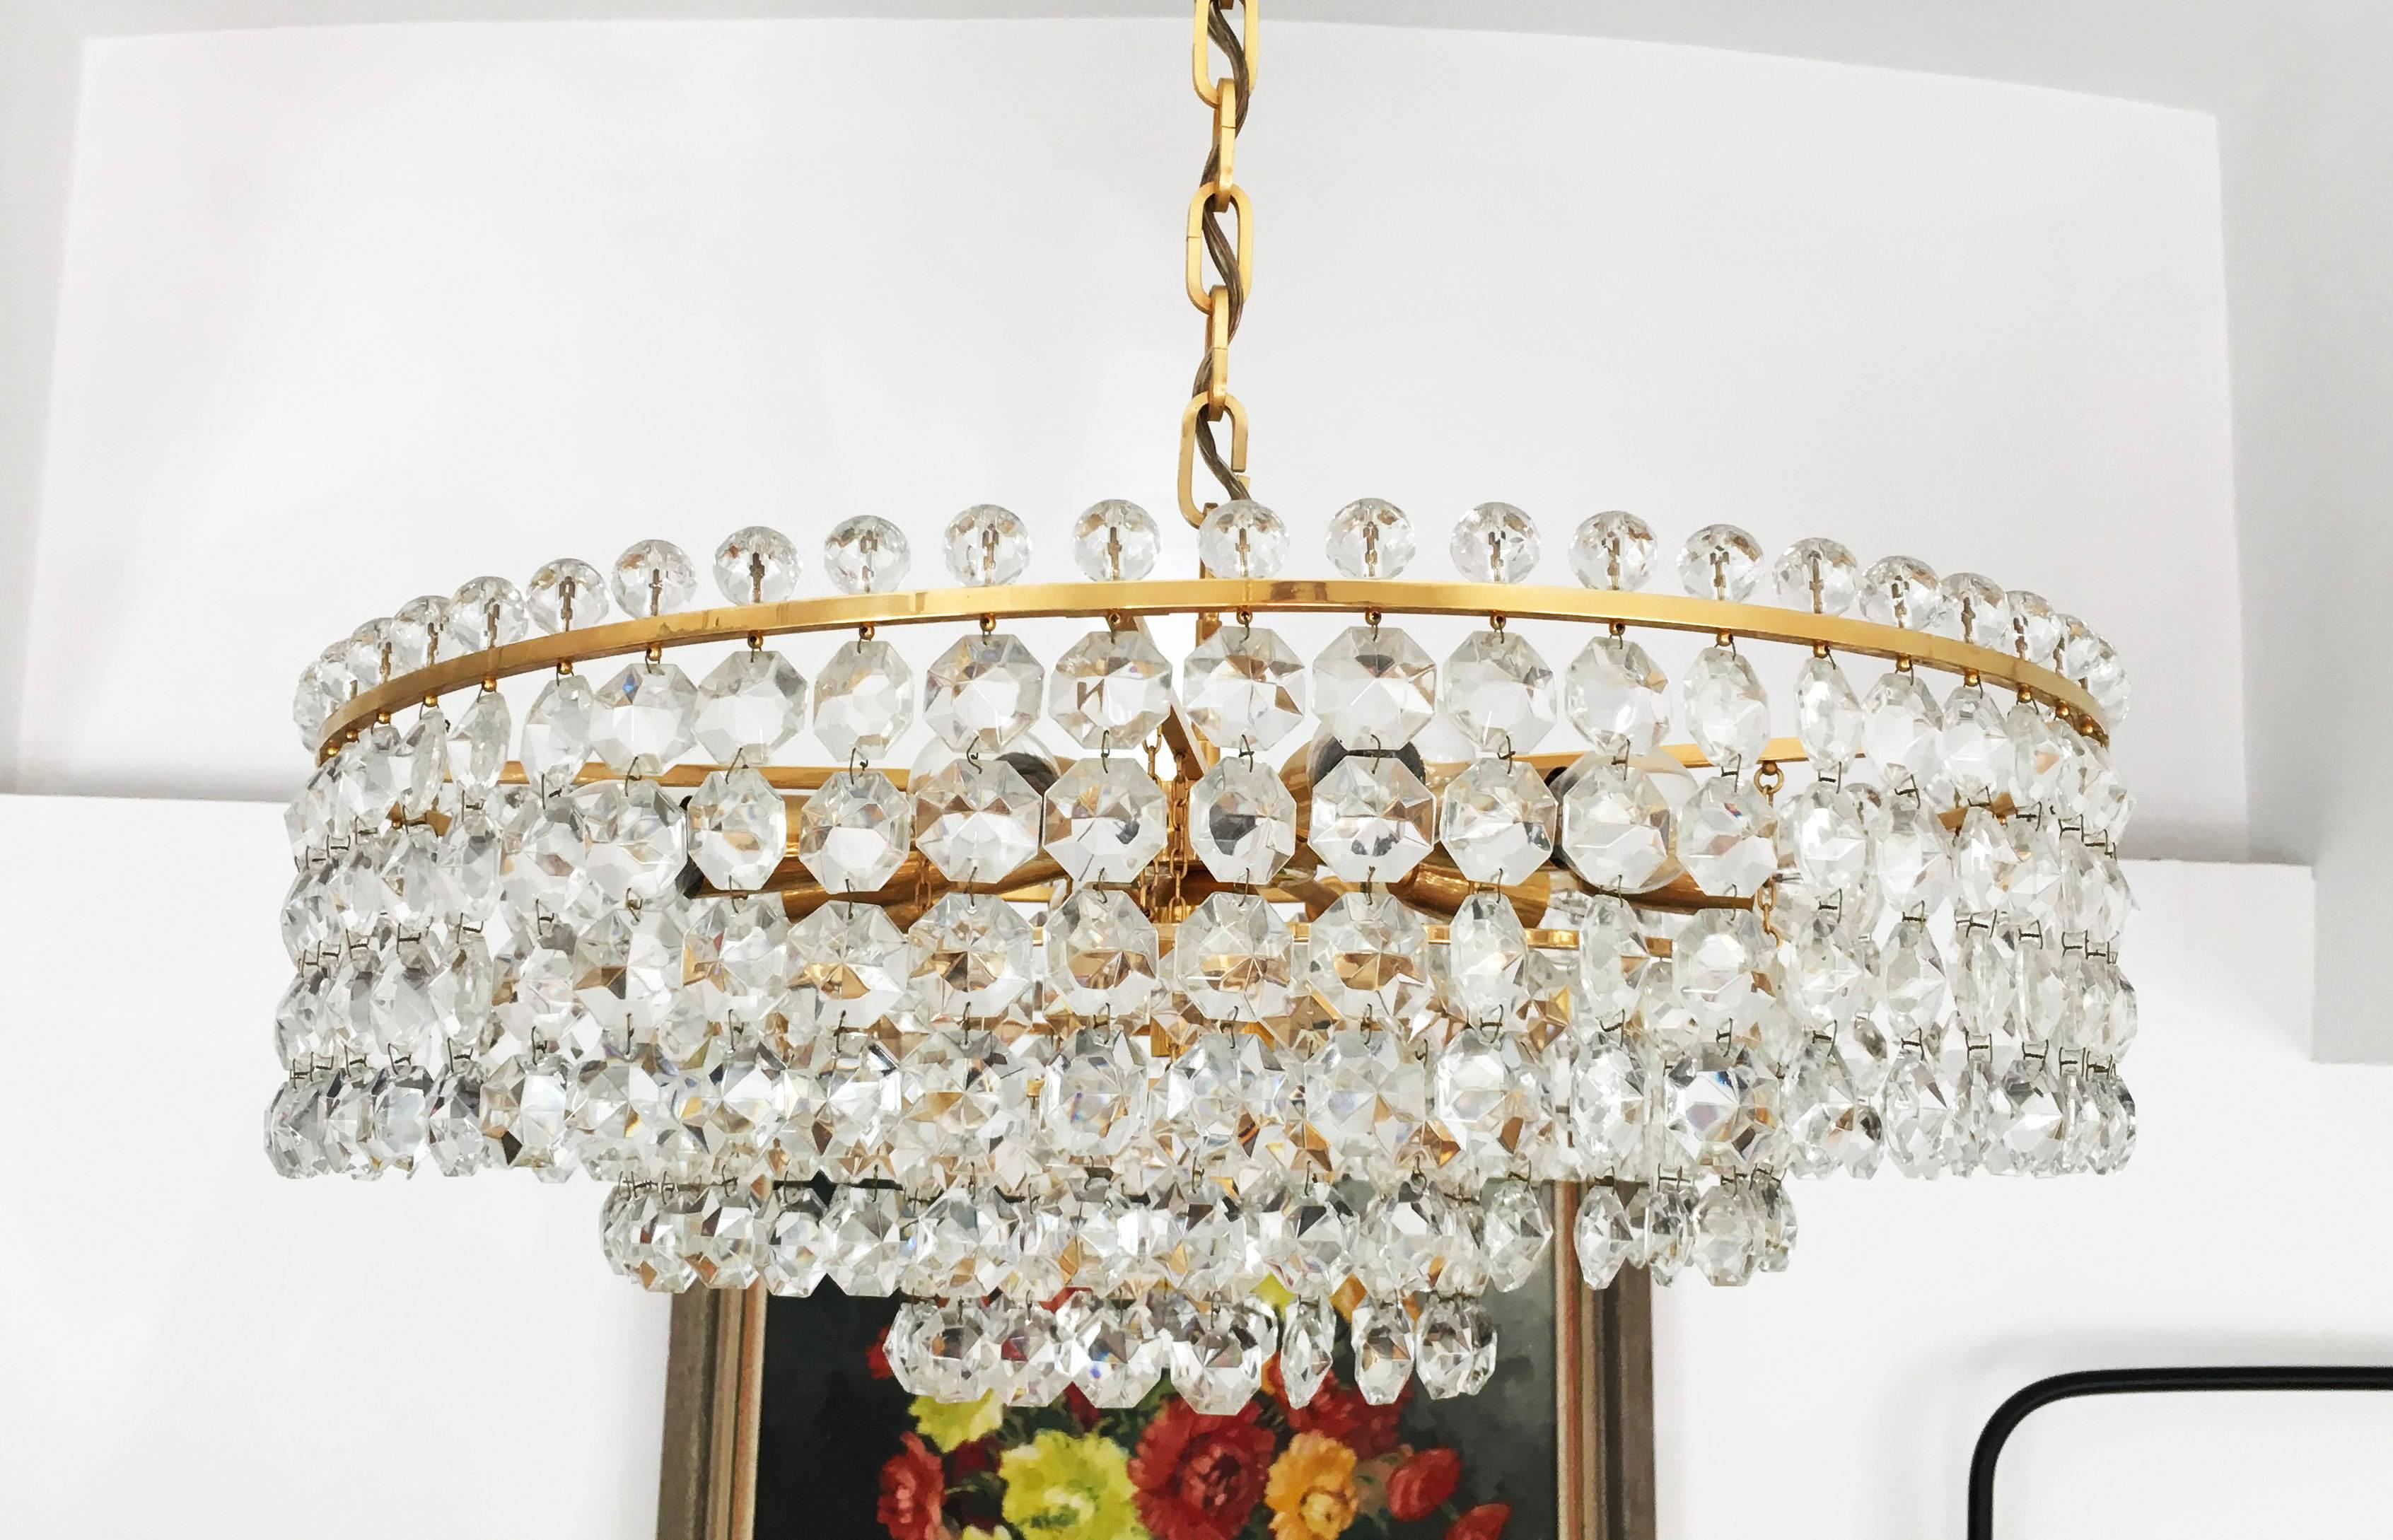 Three layers brass construction with cut crystal elements (octagons and pearls) fitted with eleven E14 sockets up to 60 watts each.
Made in Vienna in the 1960s by Bakalowits & Sohne.
Dimension of the chandelier only is: diameter 60 cm (23.62